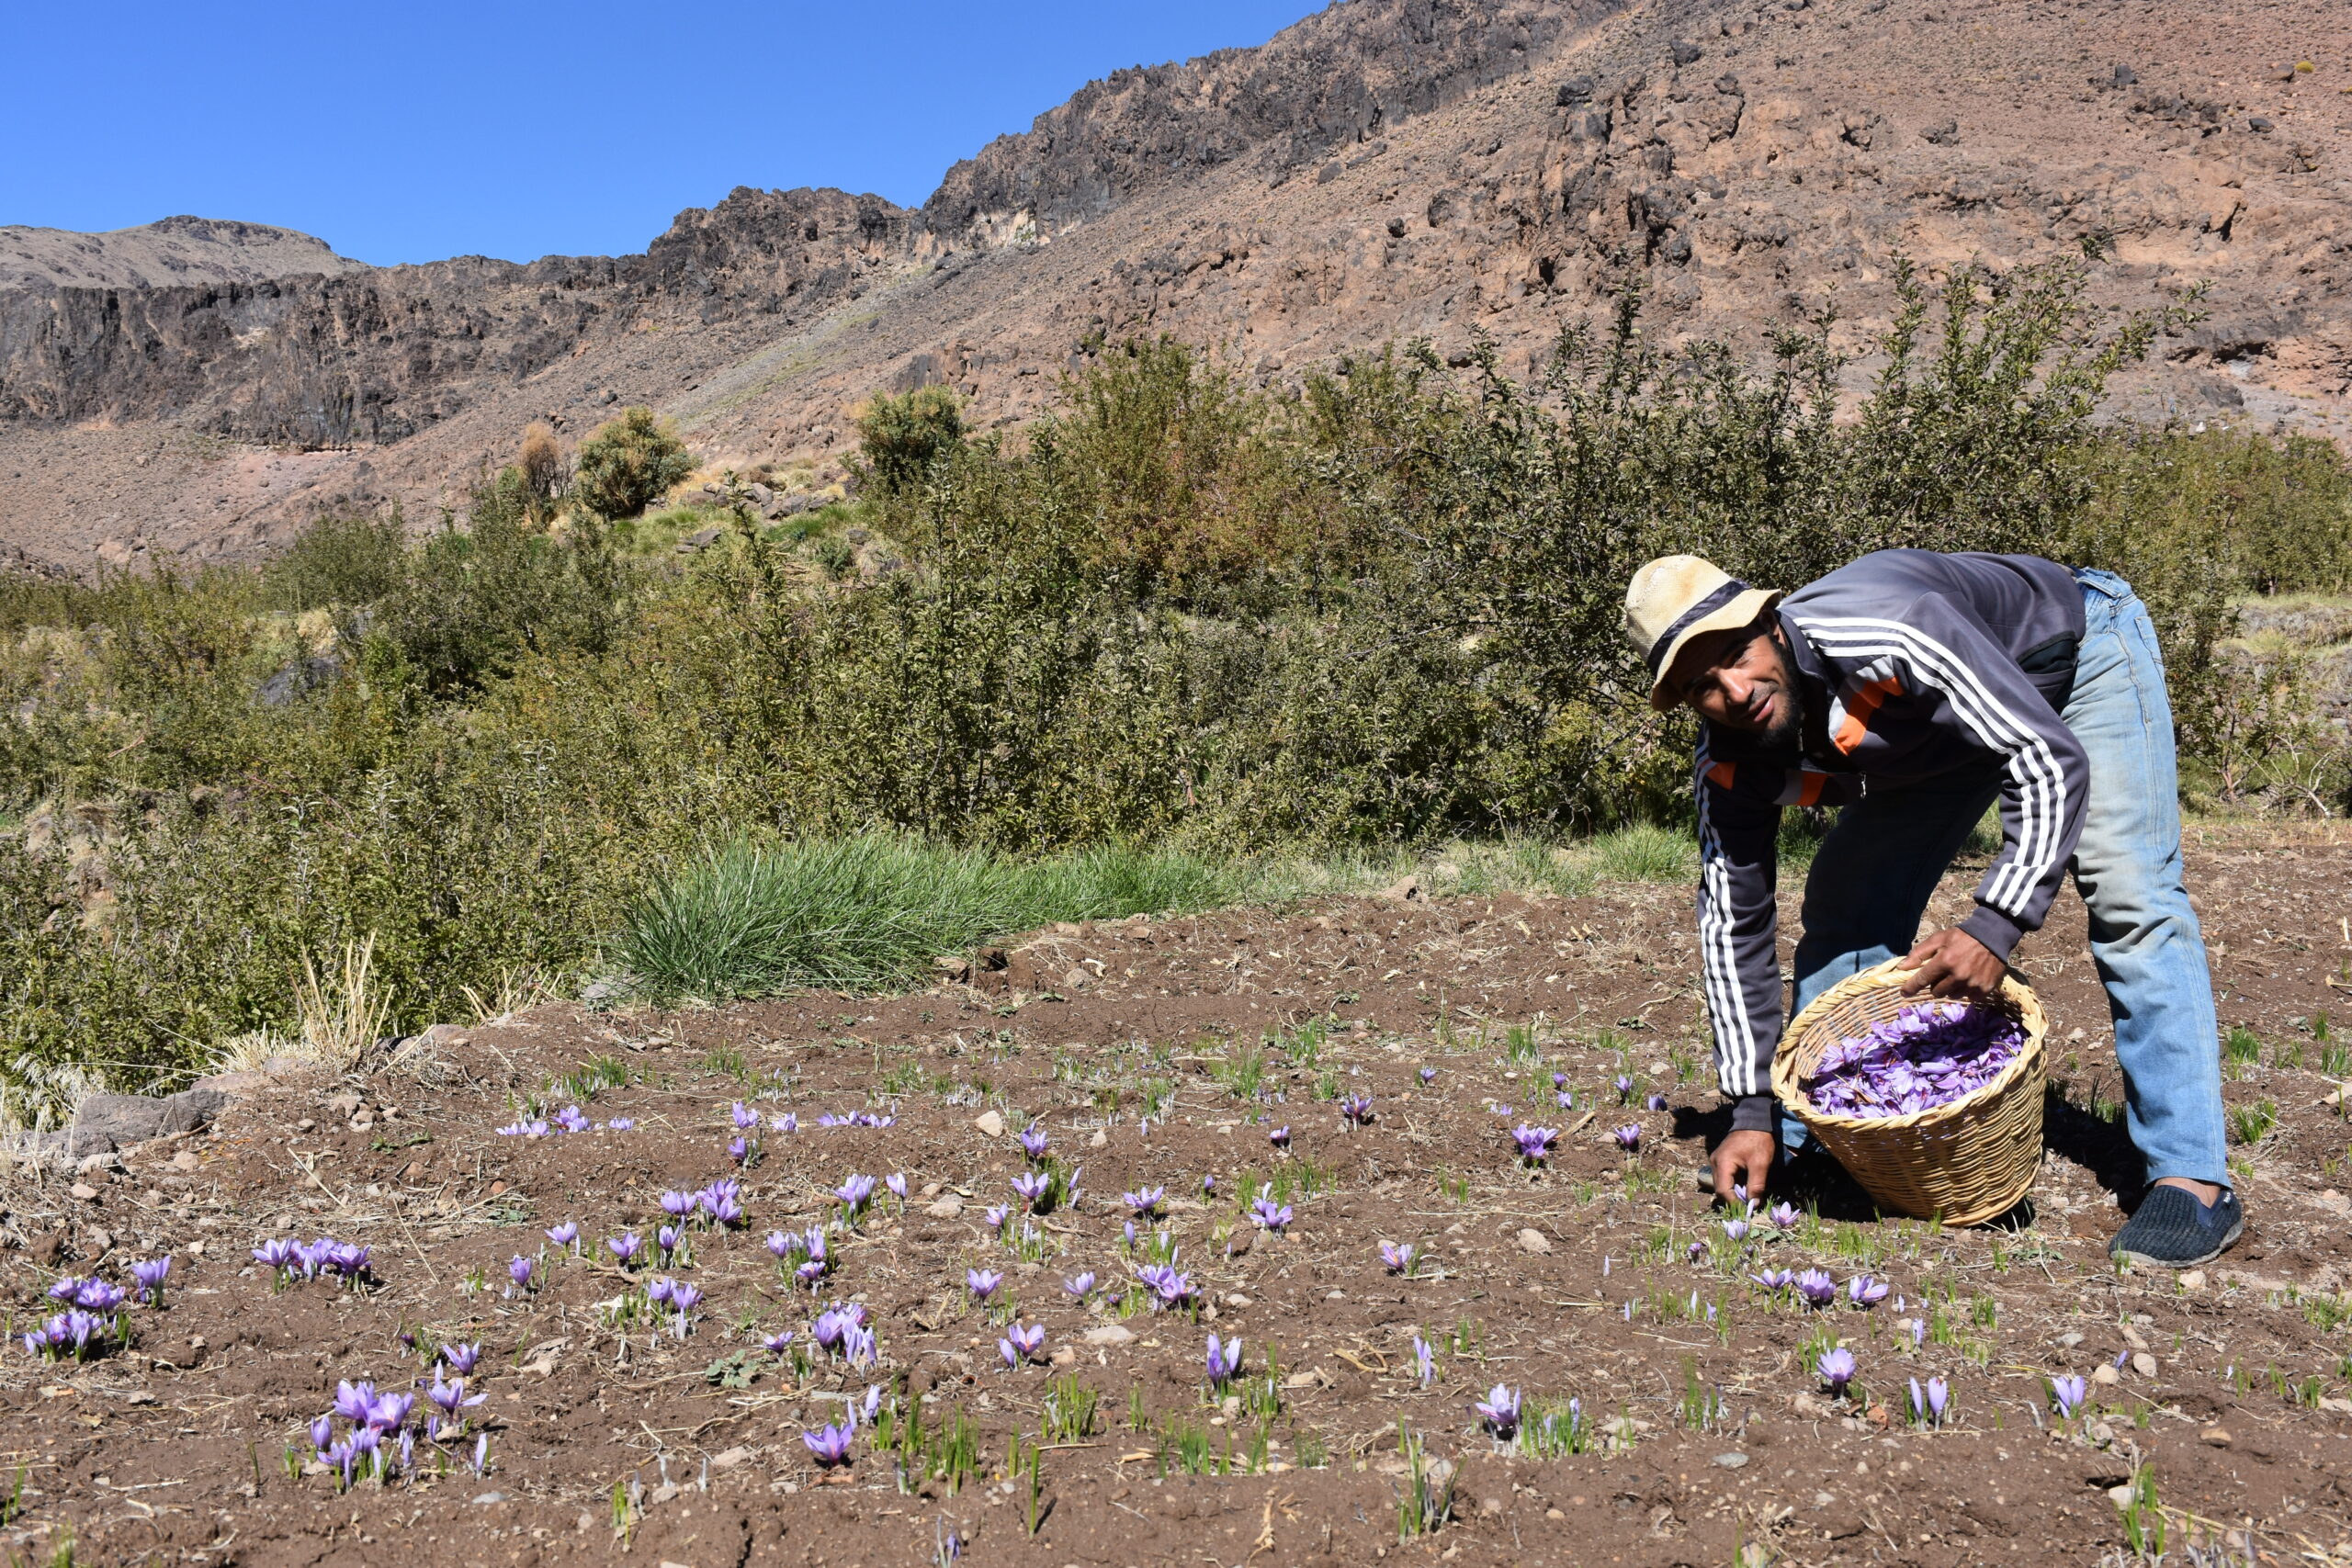 Harvesting Saffron is an art that machines couldn’t do perfectly